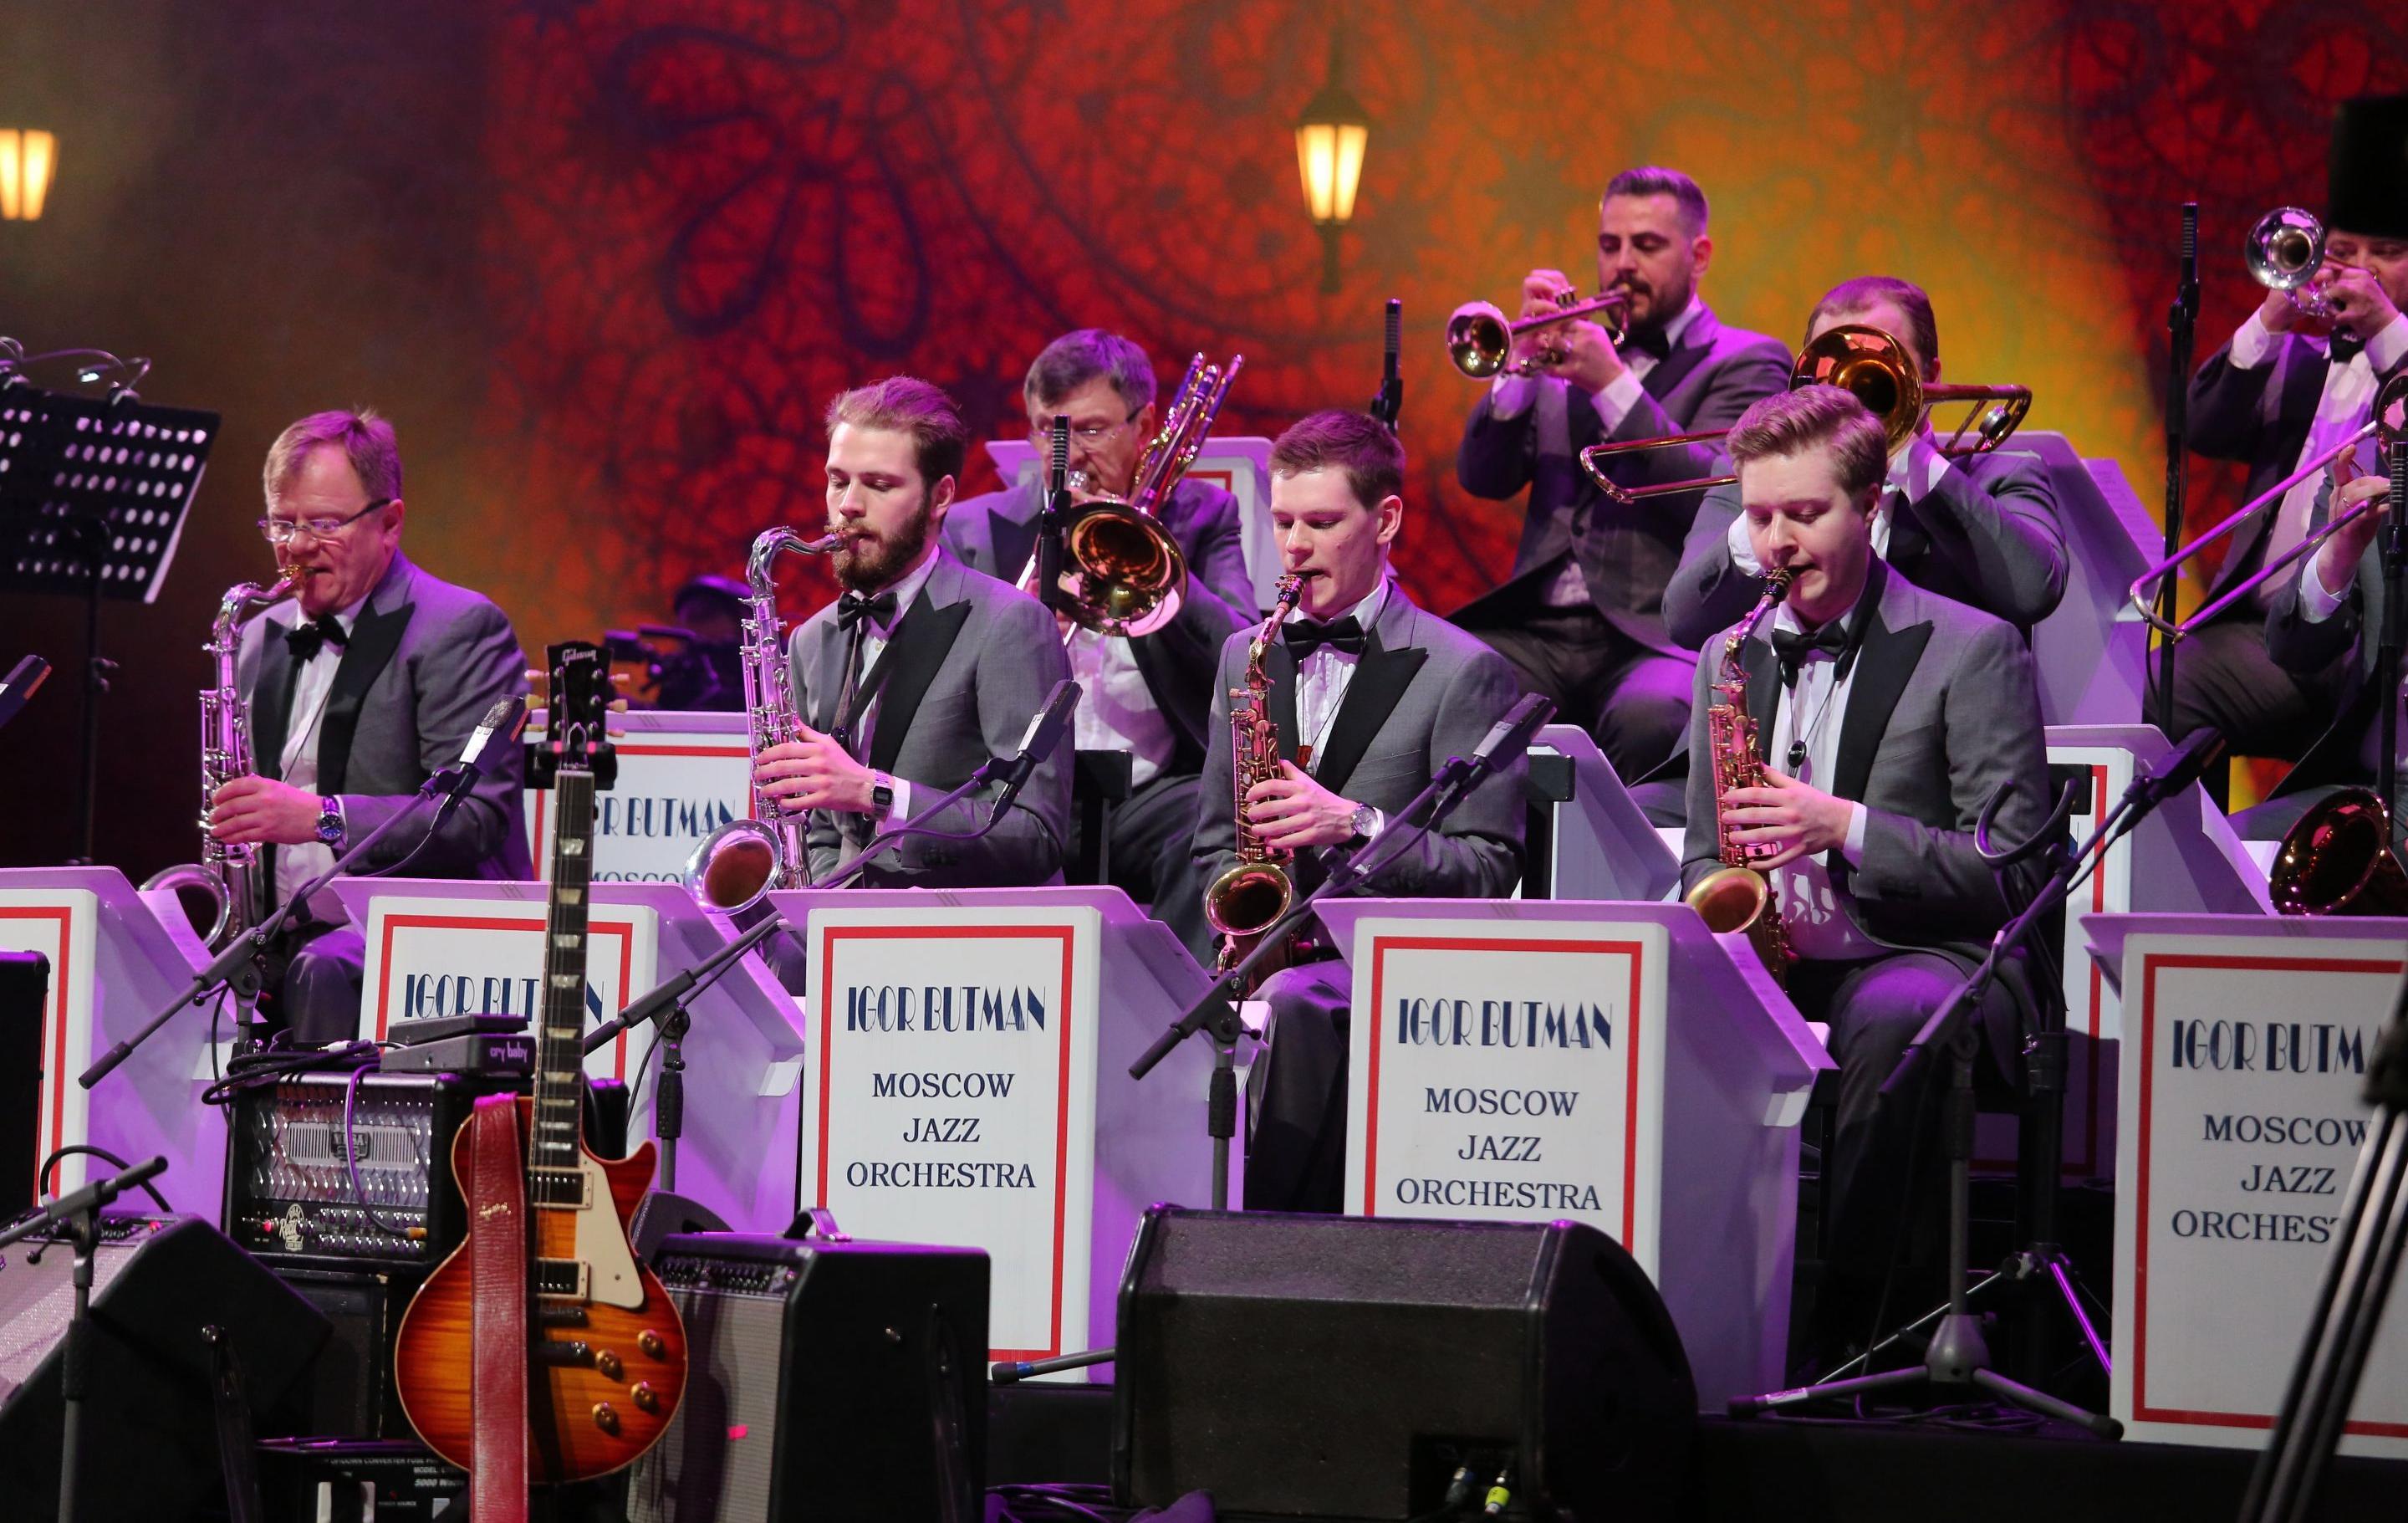 Moscow Jazz Orchestra Led by Igor Butman